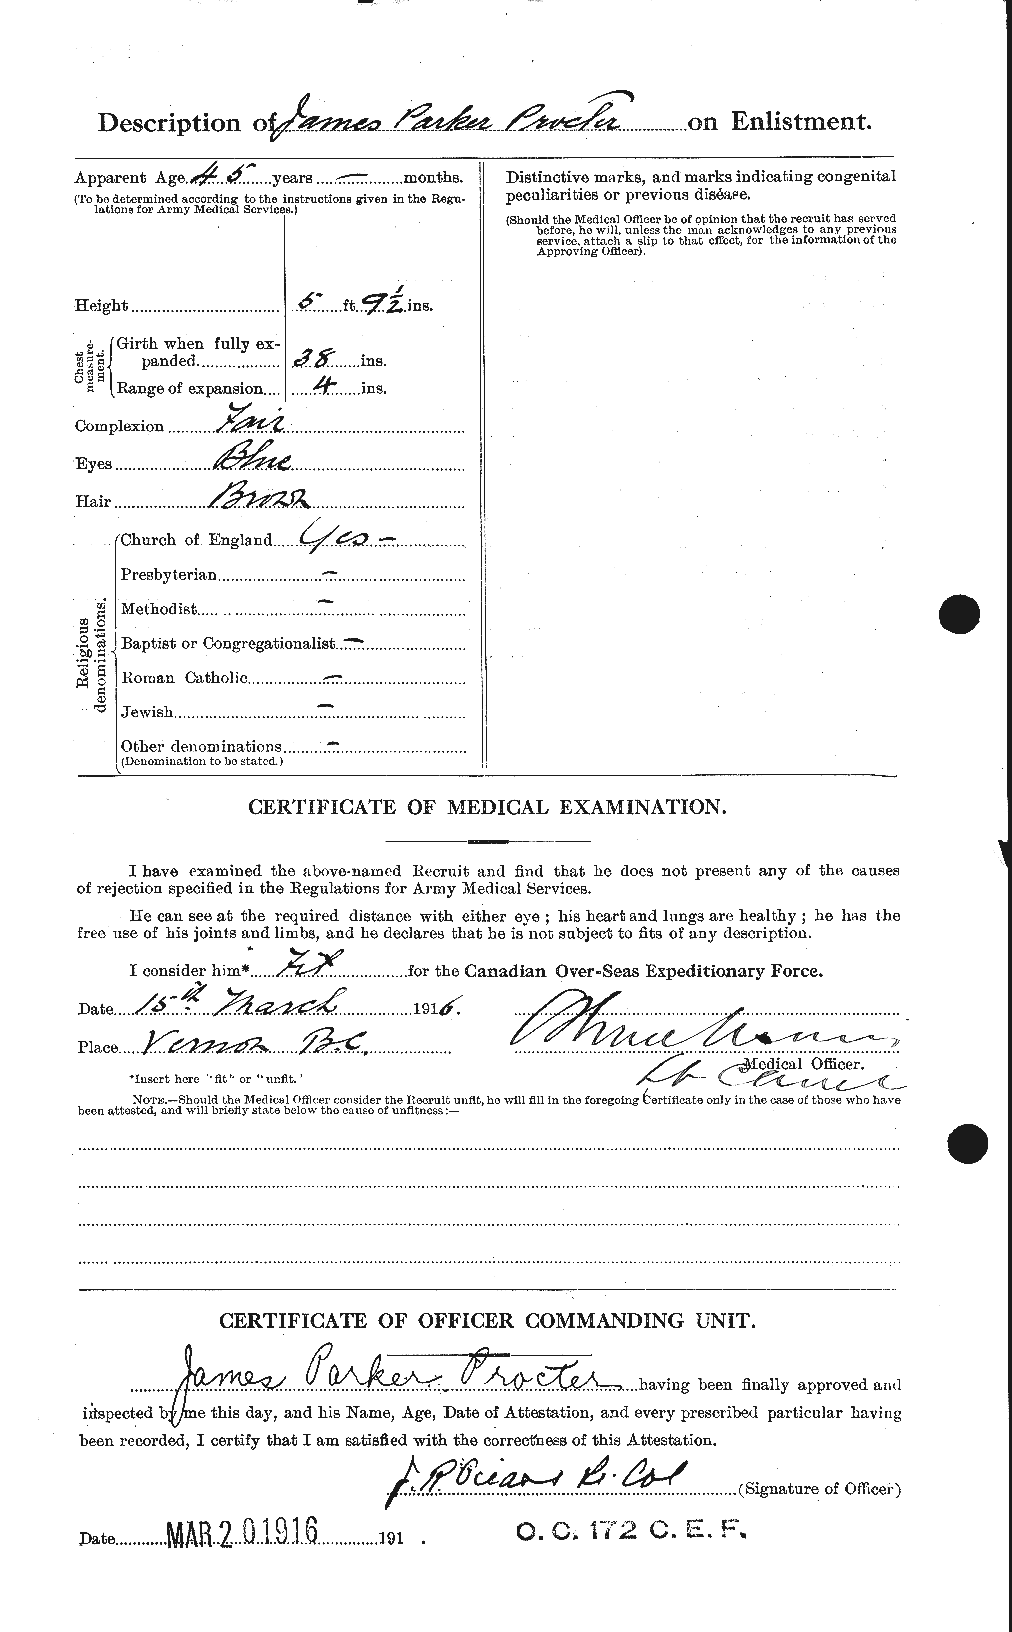 Personnel Records of the First World War - CEF 589107b